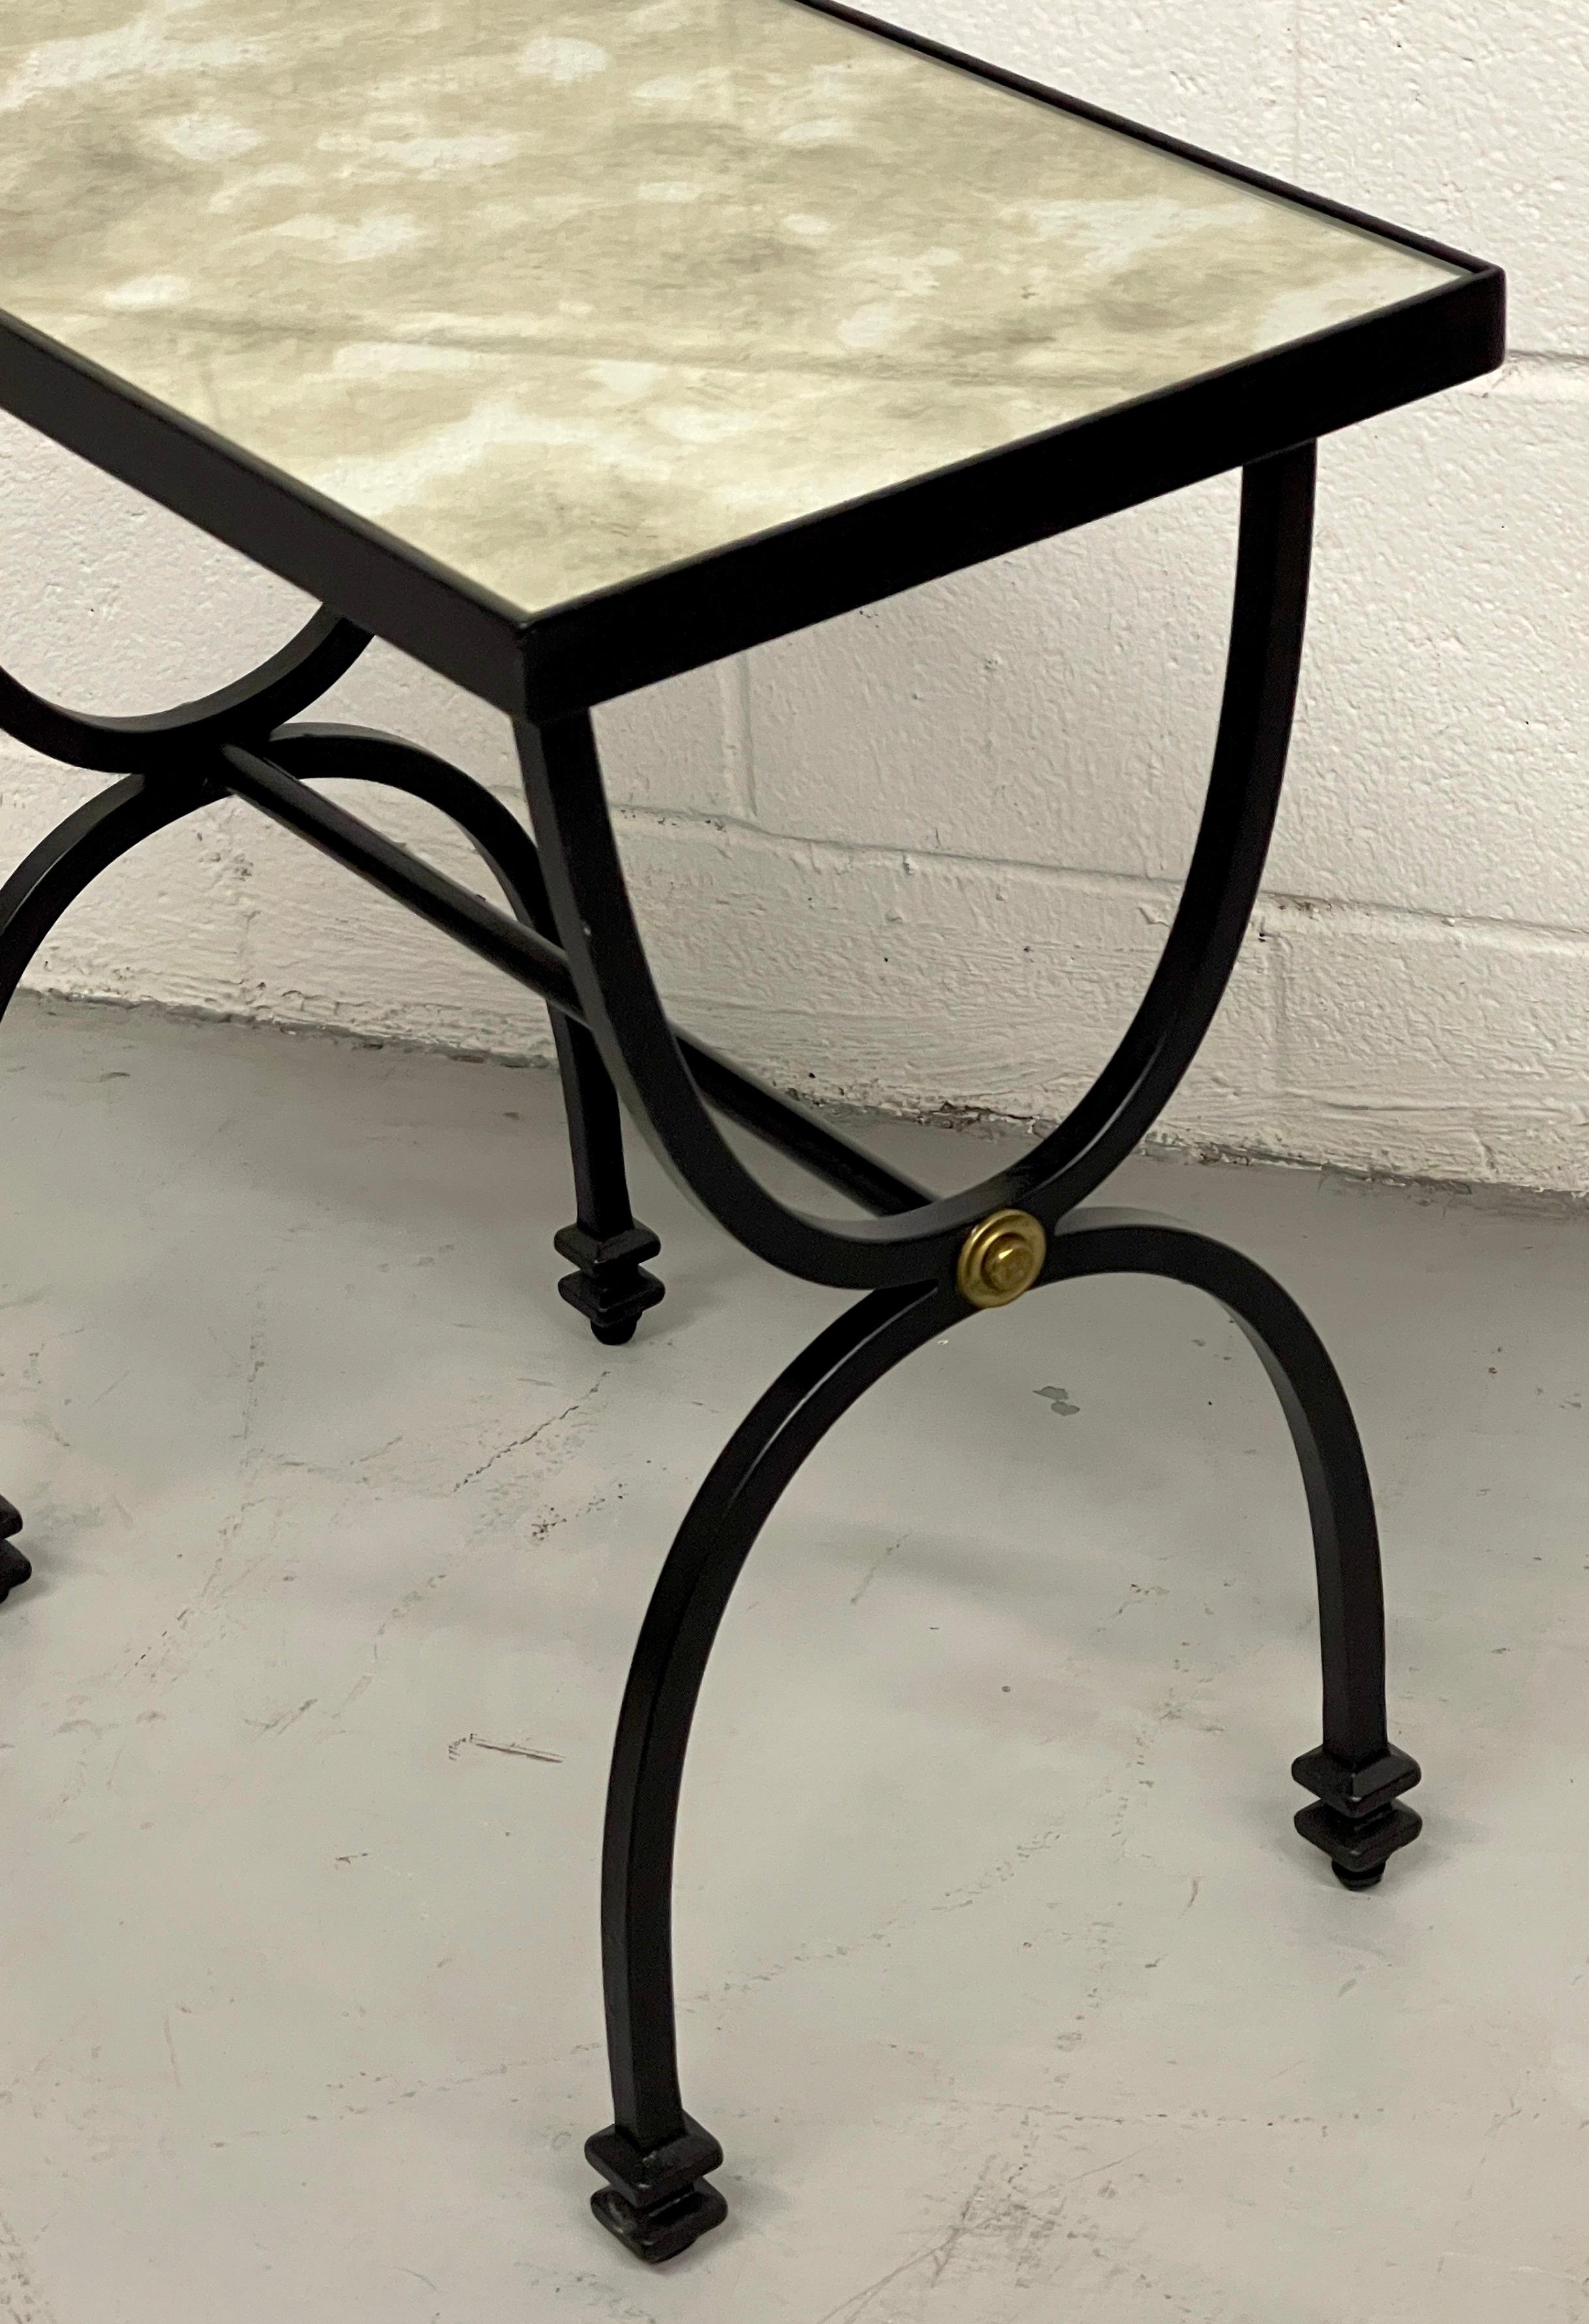 20th Century Diminutive French Modern Style Side Table, Style of Maison Jansen